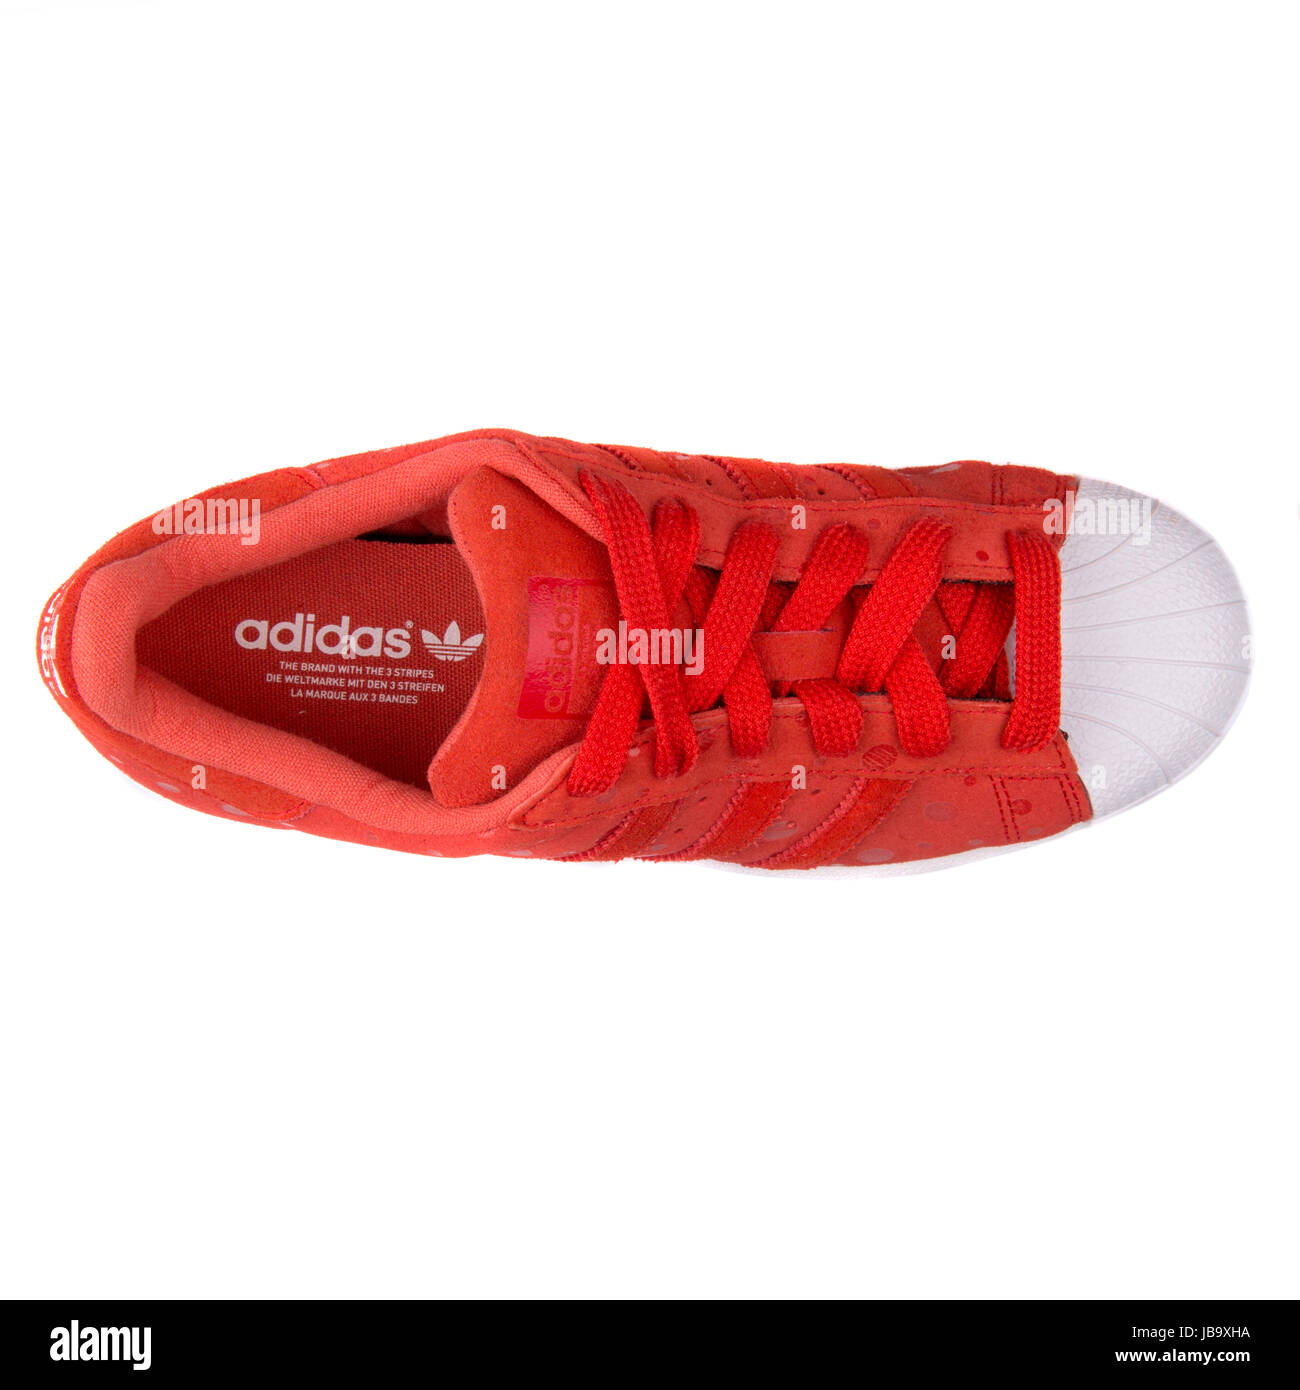 Adidas Superstar W Tomato Red Women's Sports Shoes - S77411 Stock Photo -  Alamy